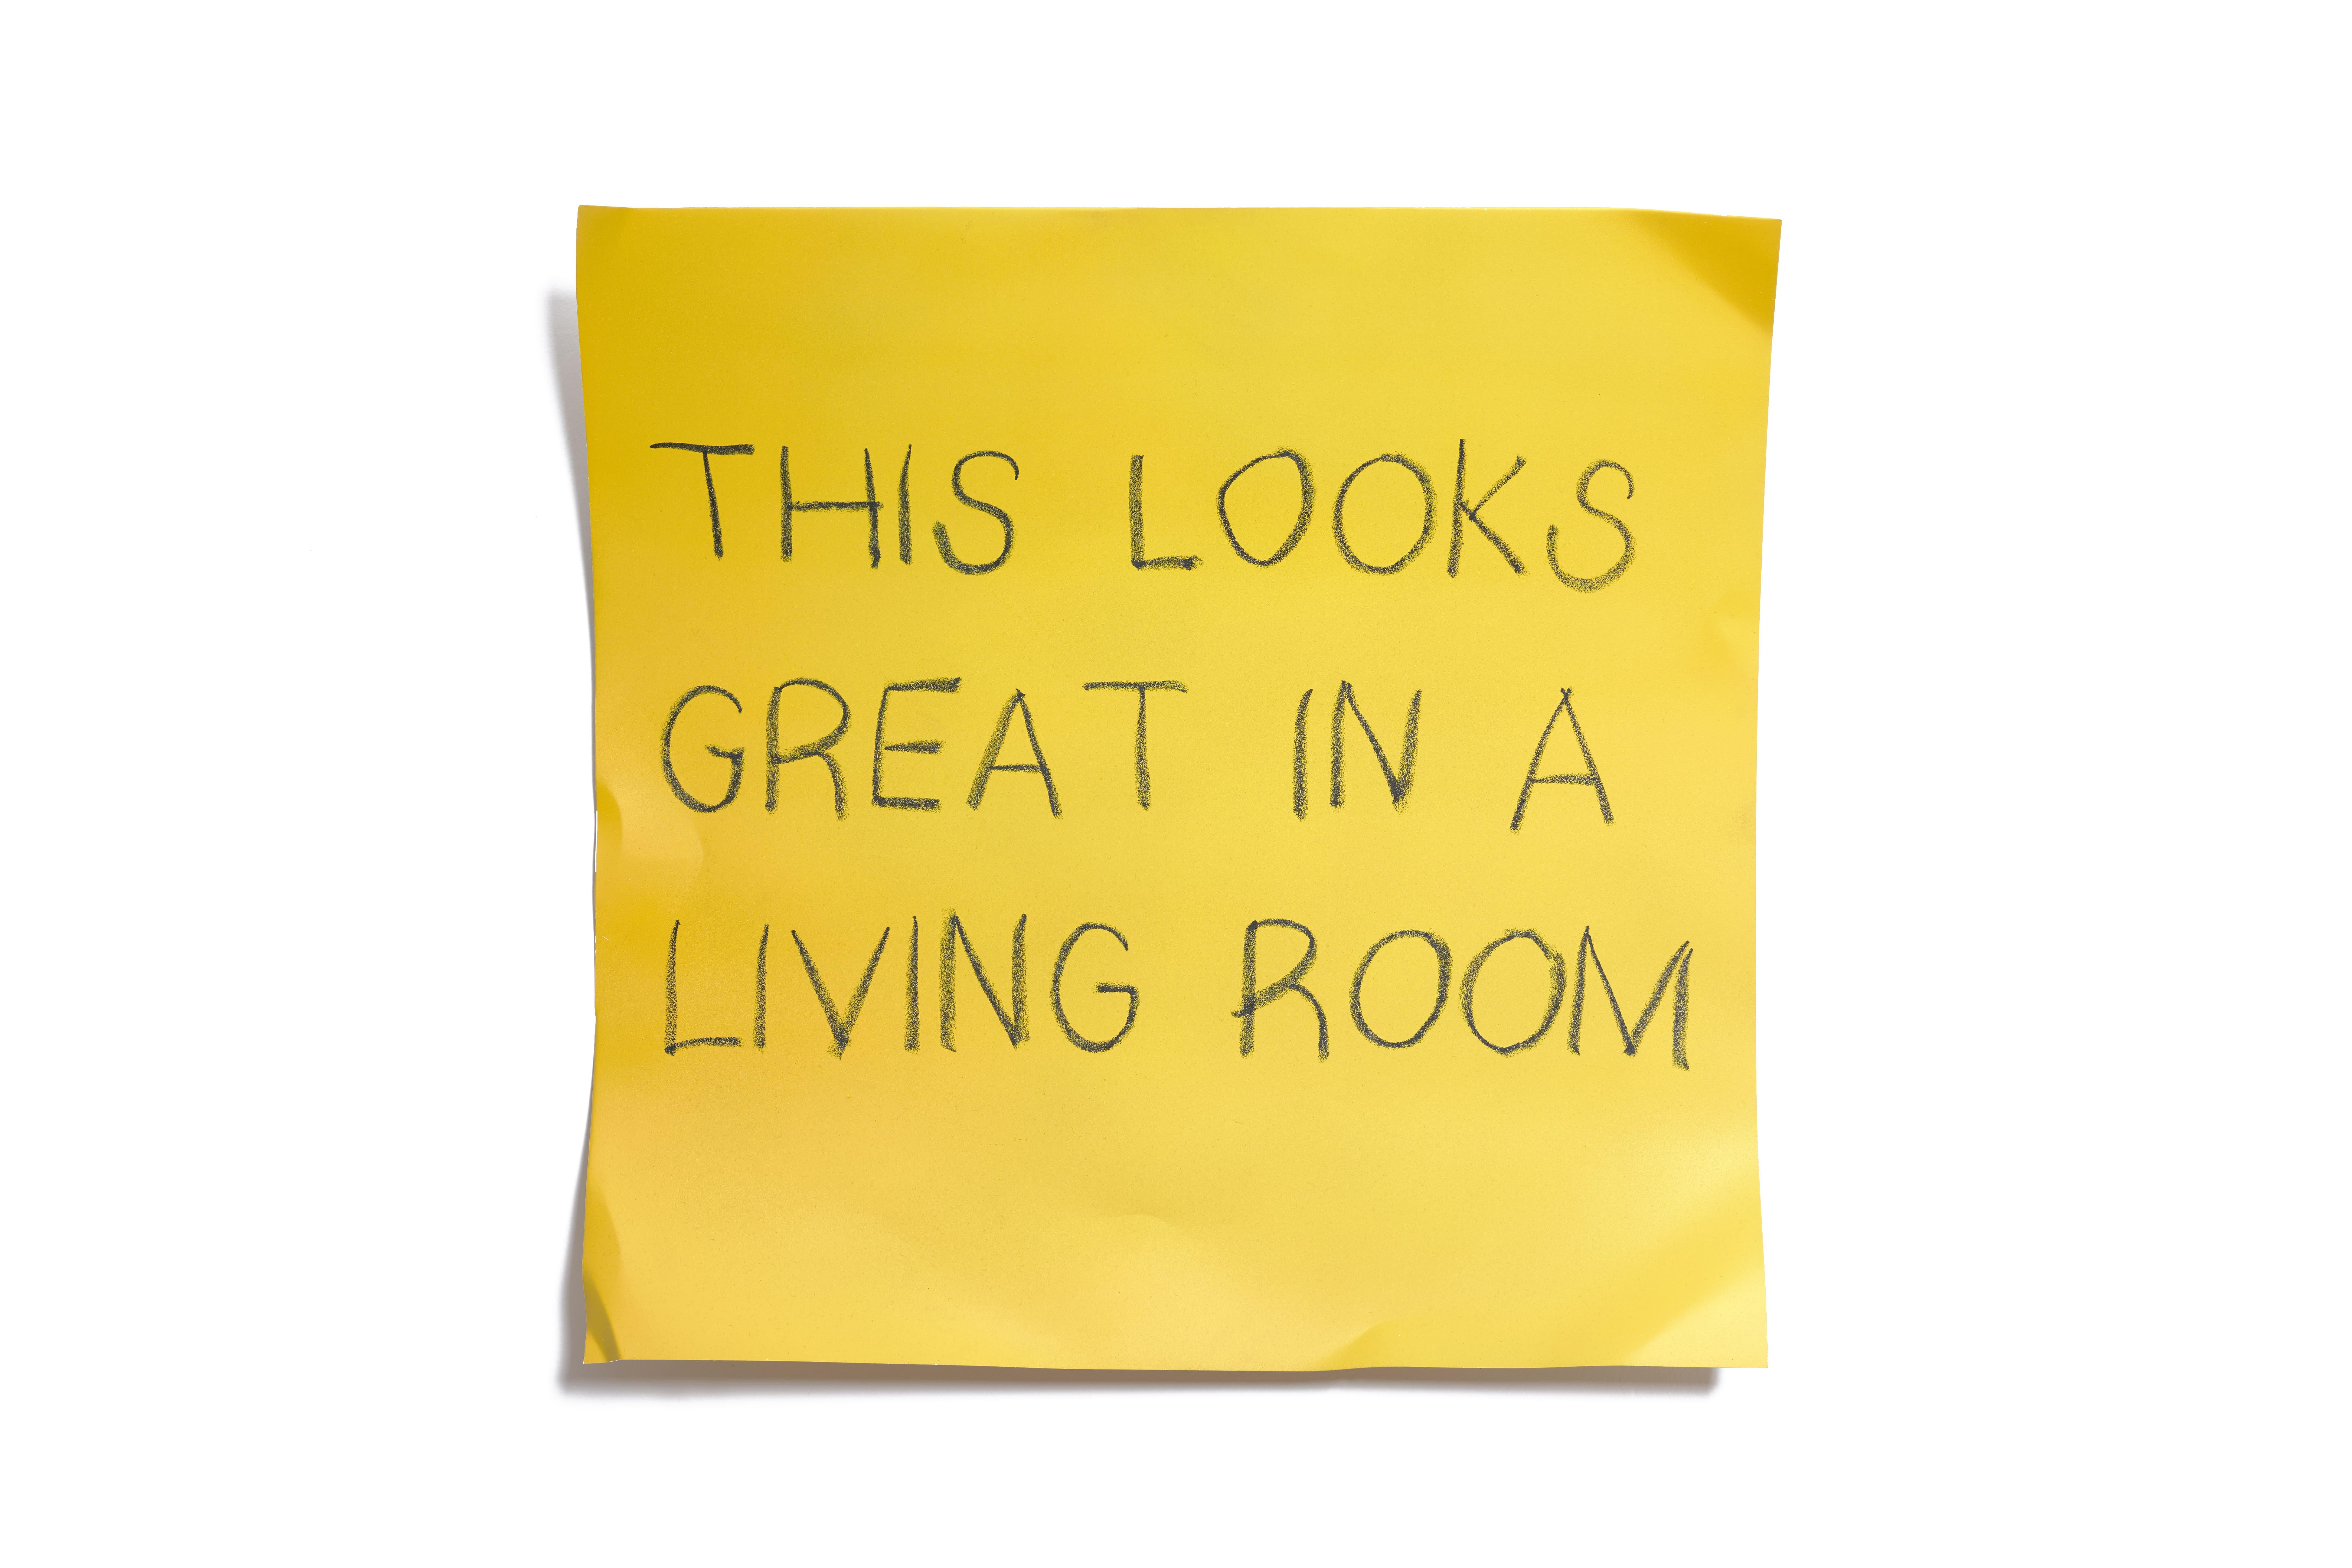 Daniele Sigalot, Your living room wants it - Words, 2020, mixed media, Yellow